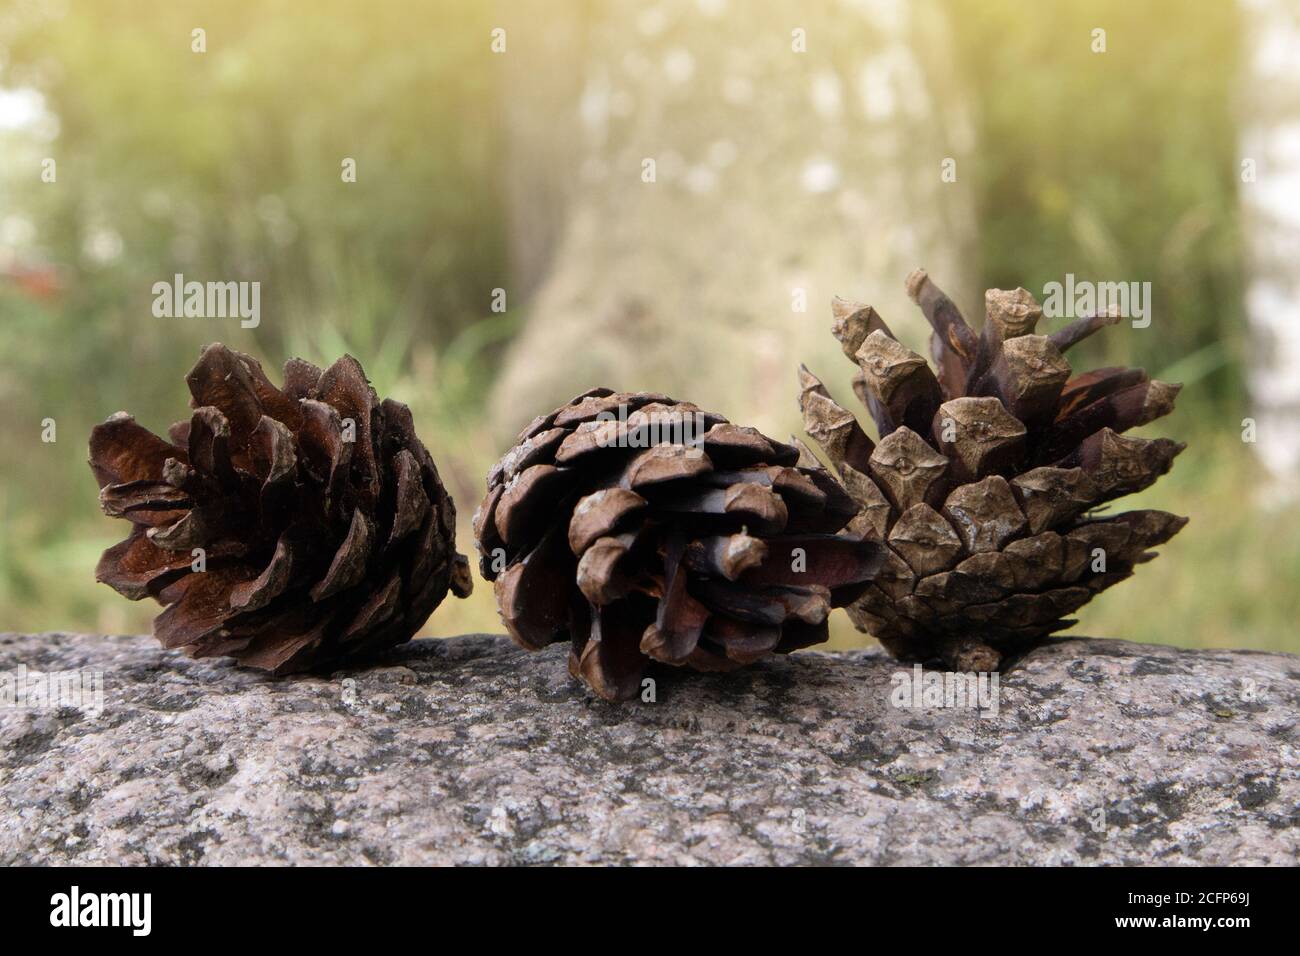 Three fallen opened ripe pine cones lying on the granite boulder against blurred background Stock Photo